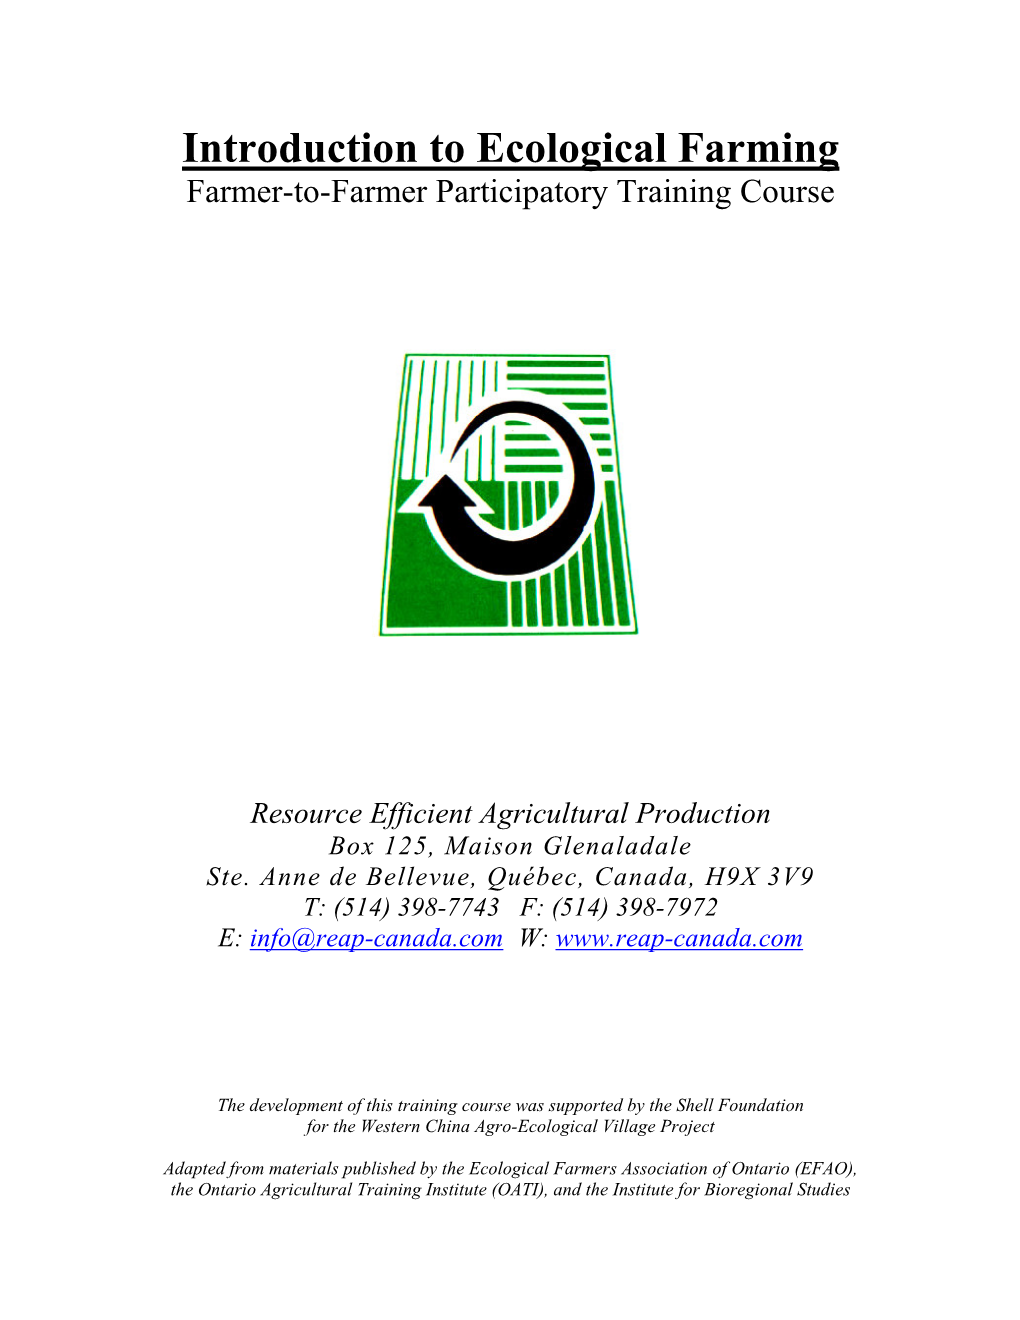 Introduction to Ecological Farming Farmer-To-Farmer Participatory Training Course